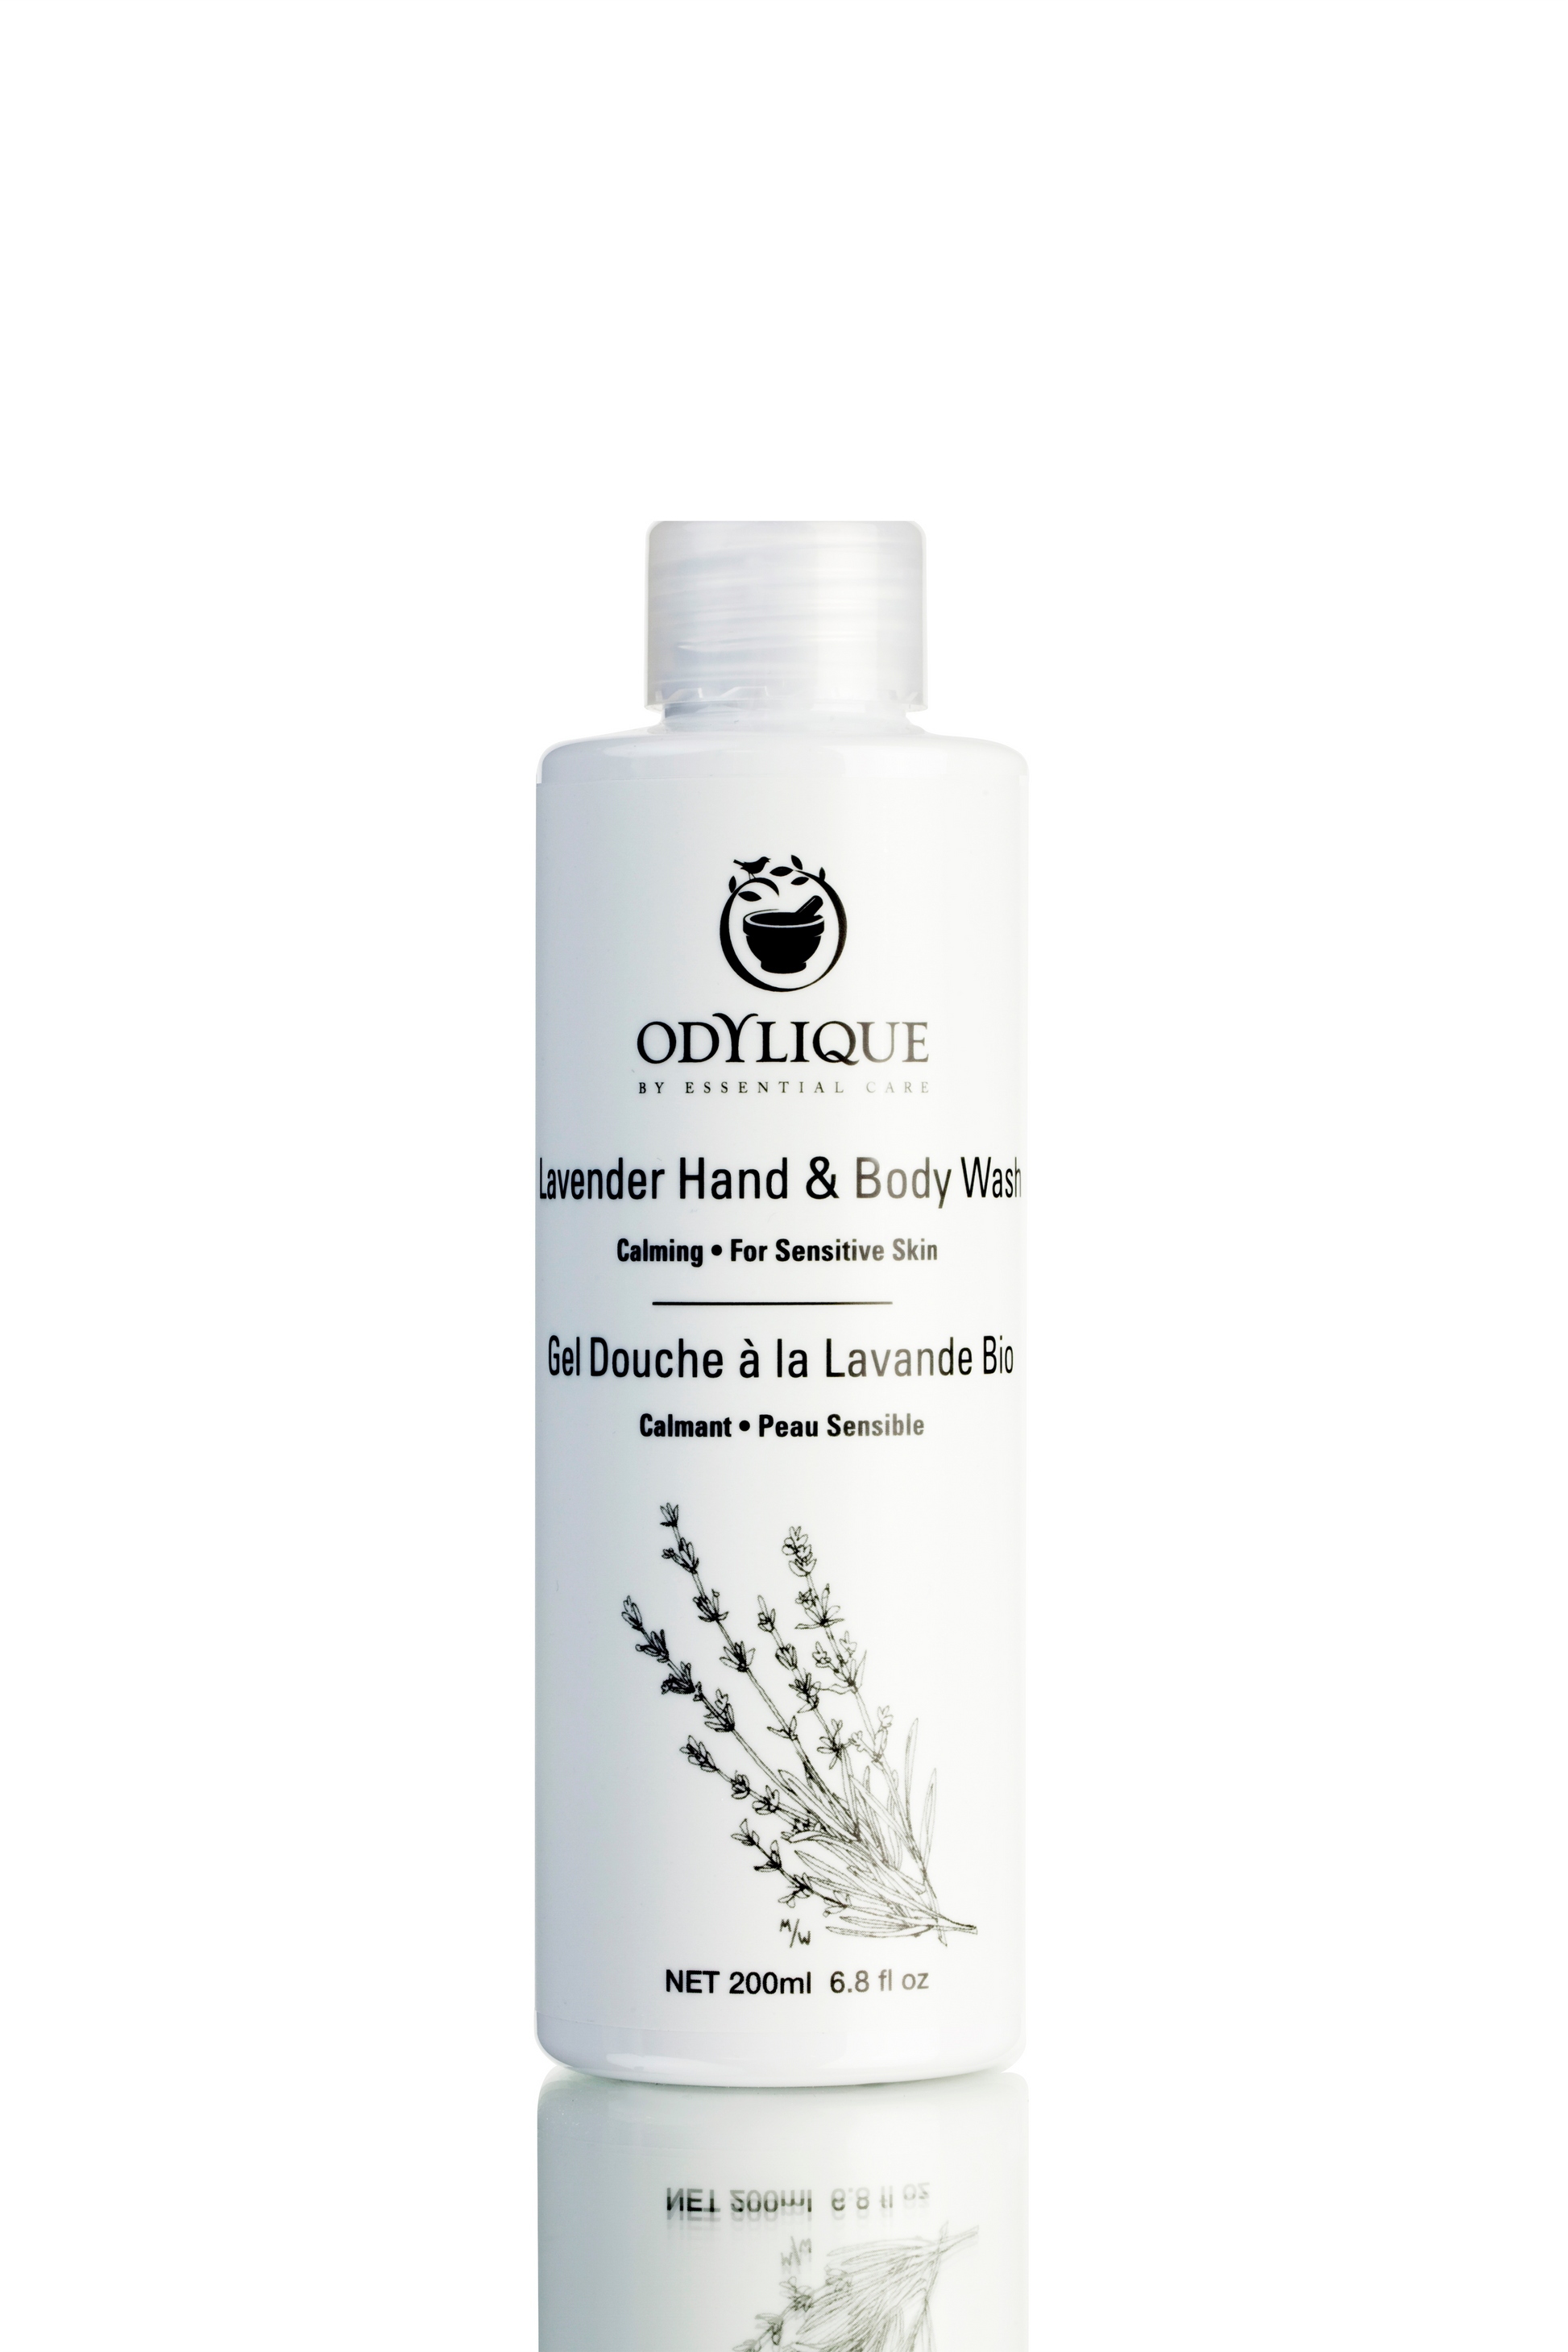 Odylique Lavender Hand and Body Wash for sensitive skin. SLS free, all natural.